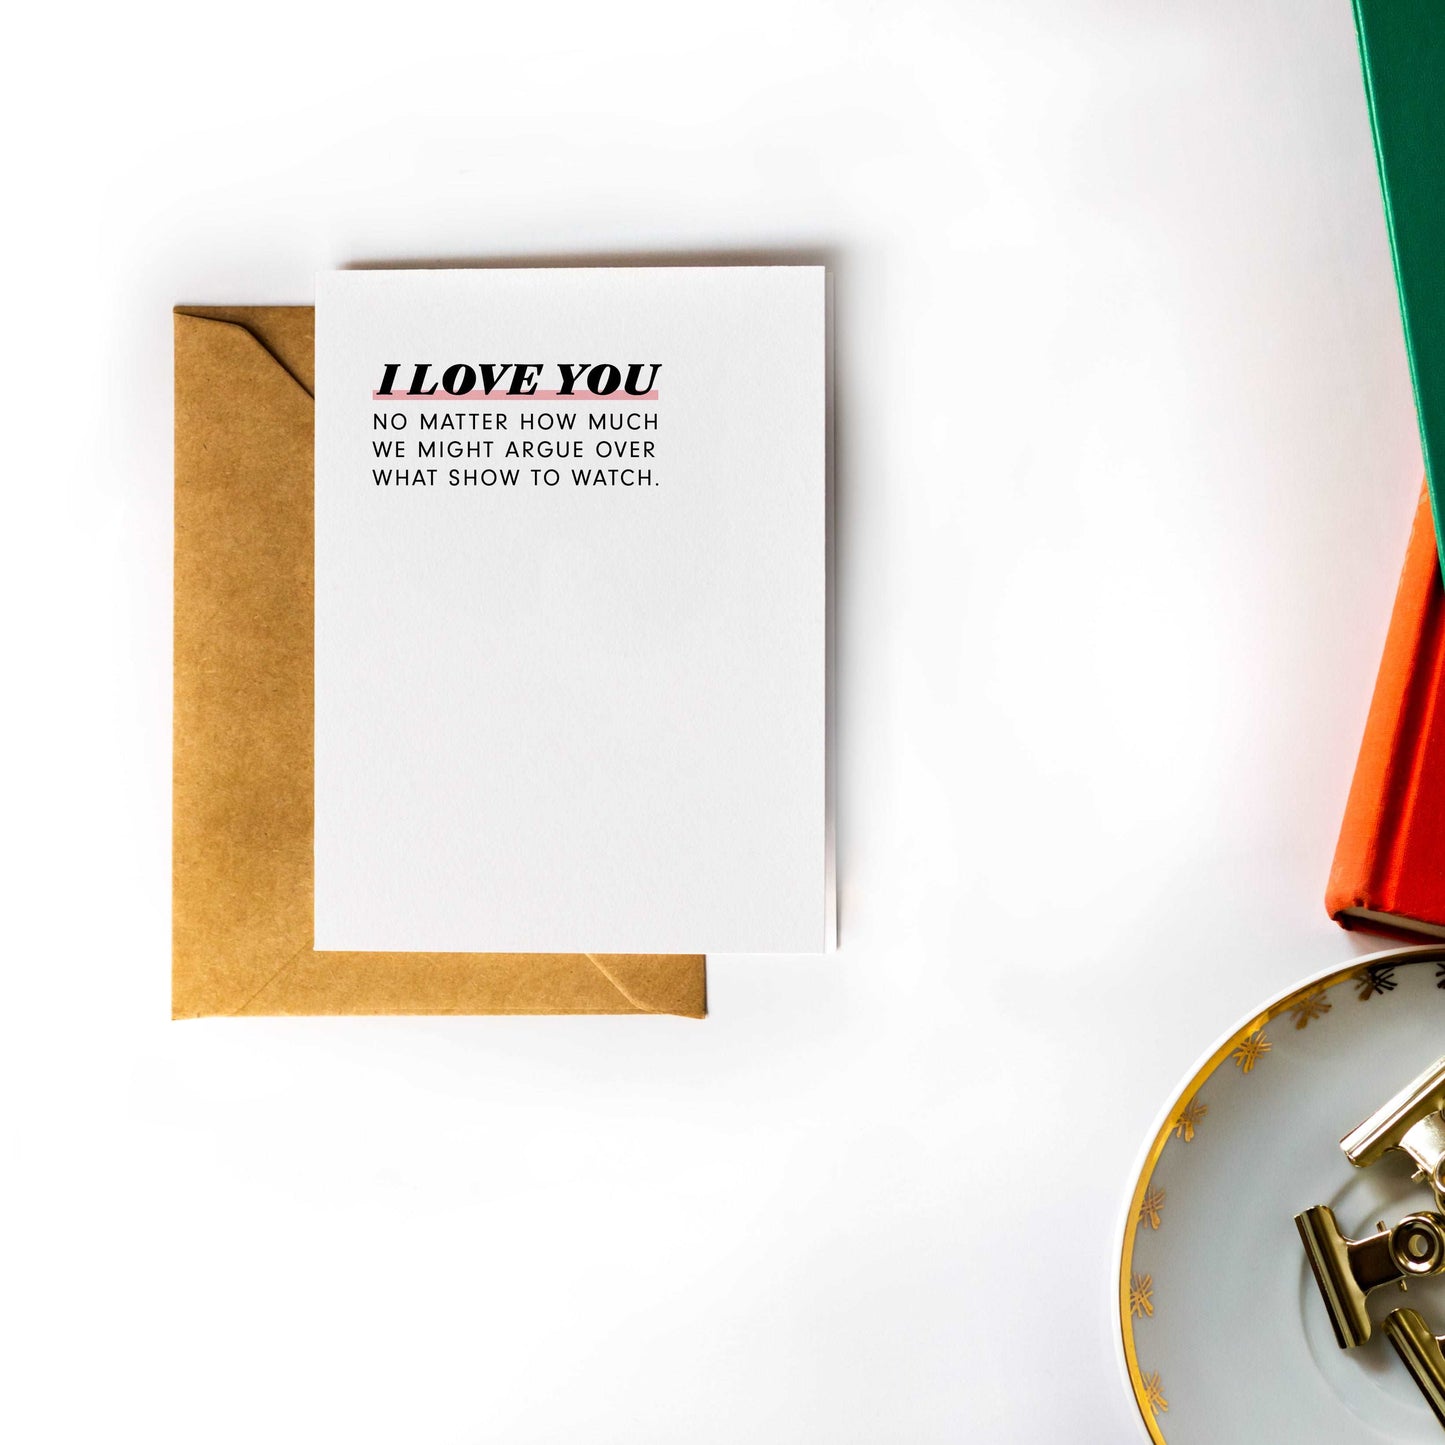 I Love You No Matter What - Greeting Card